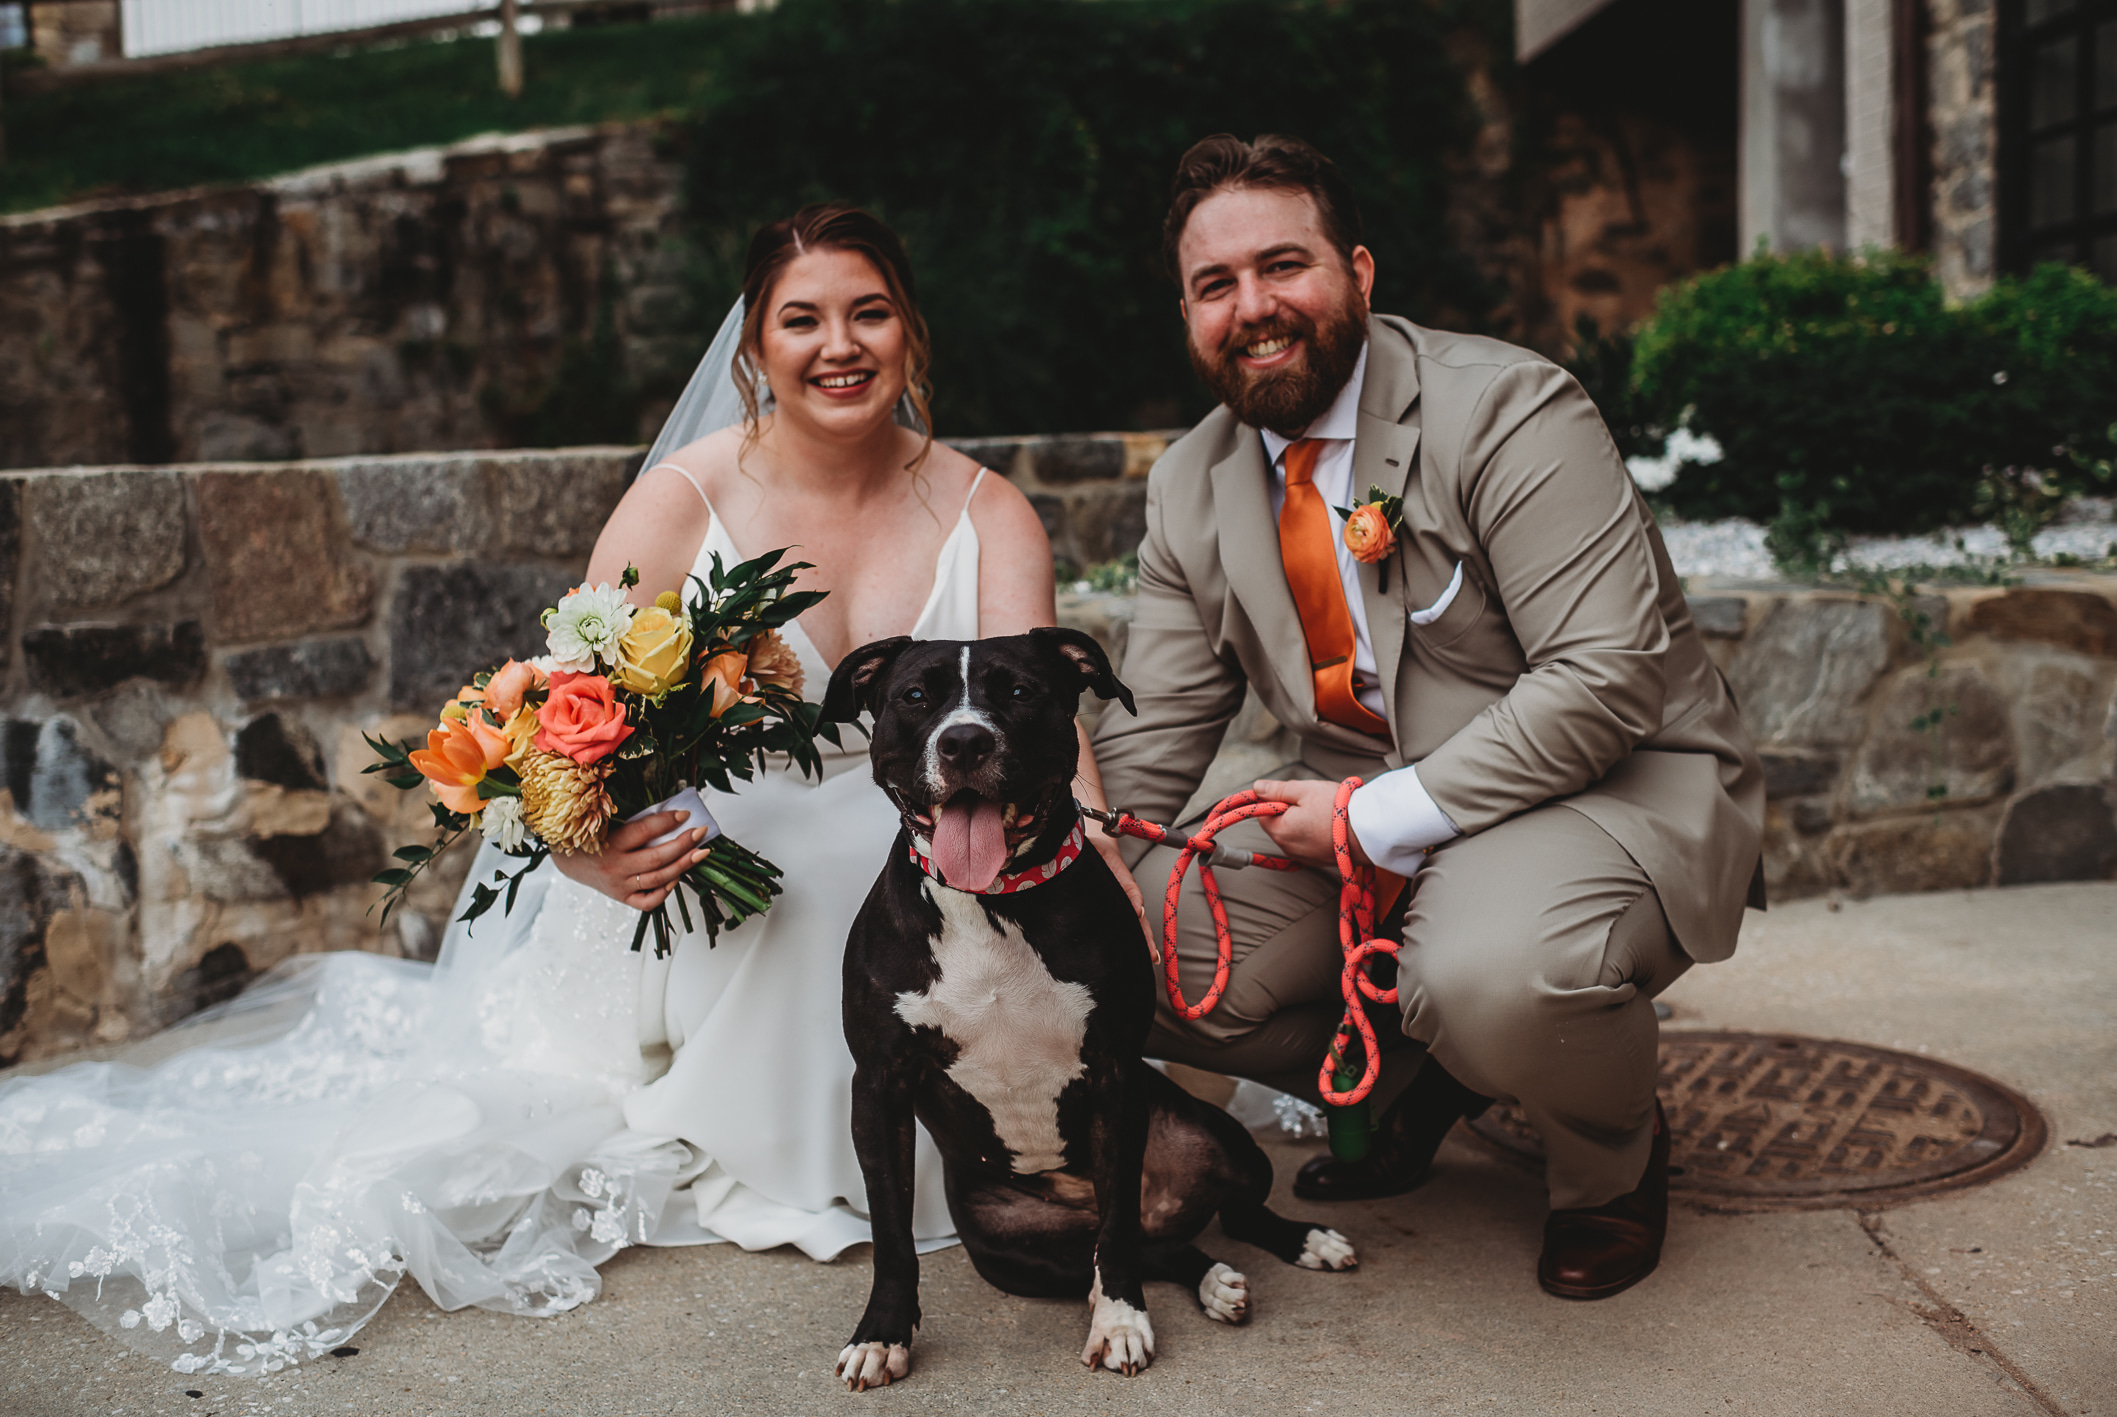 A colorful, summer wedding at Mainstreet Ballroom in historic Ellicott City, Maryland. Captured by Brittany Dunbar Photography, an Ellicott City Wedding Photographer.